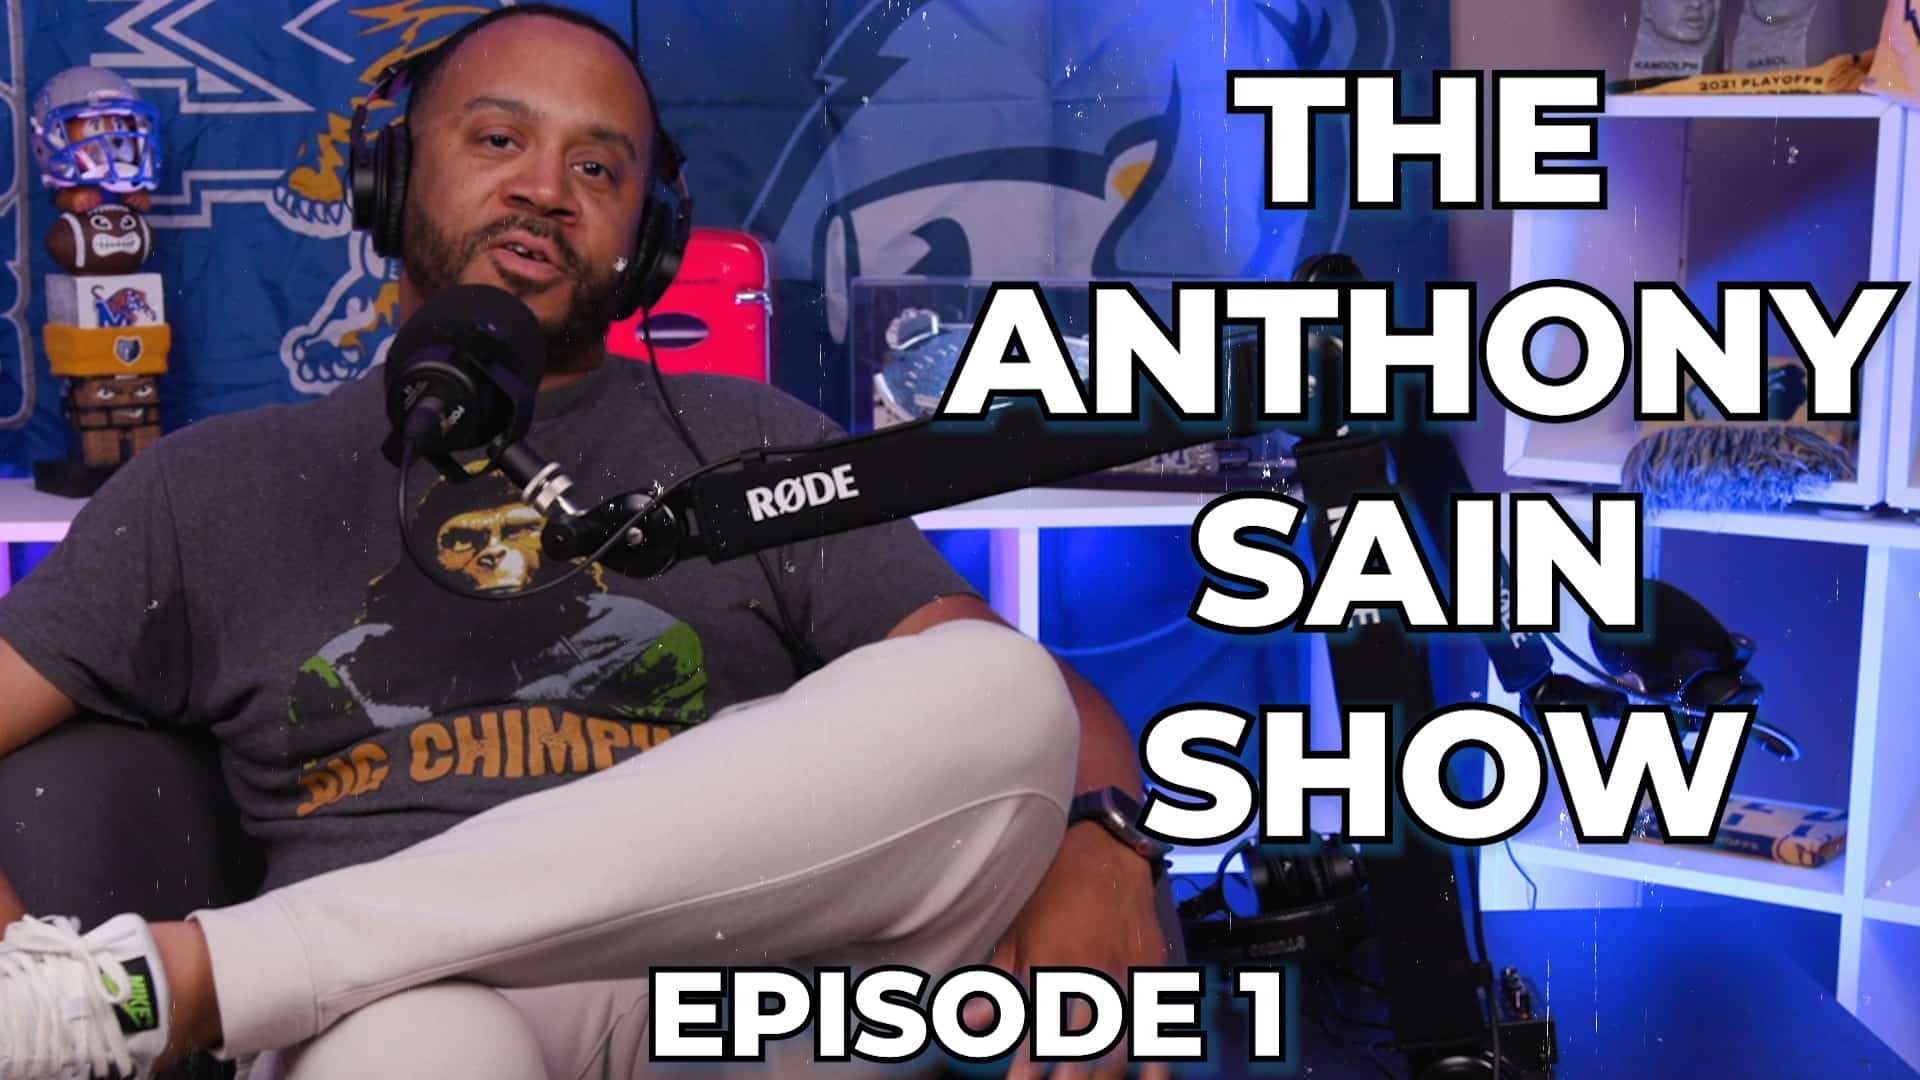 Featured image for “The Anthony Sain Show Ep 1: No Stones Unturned”